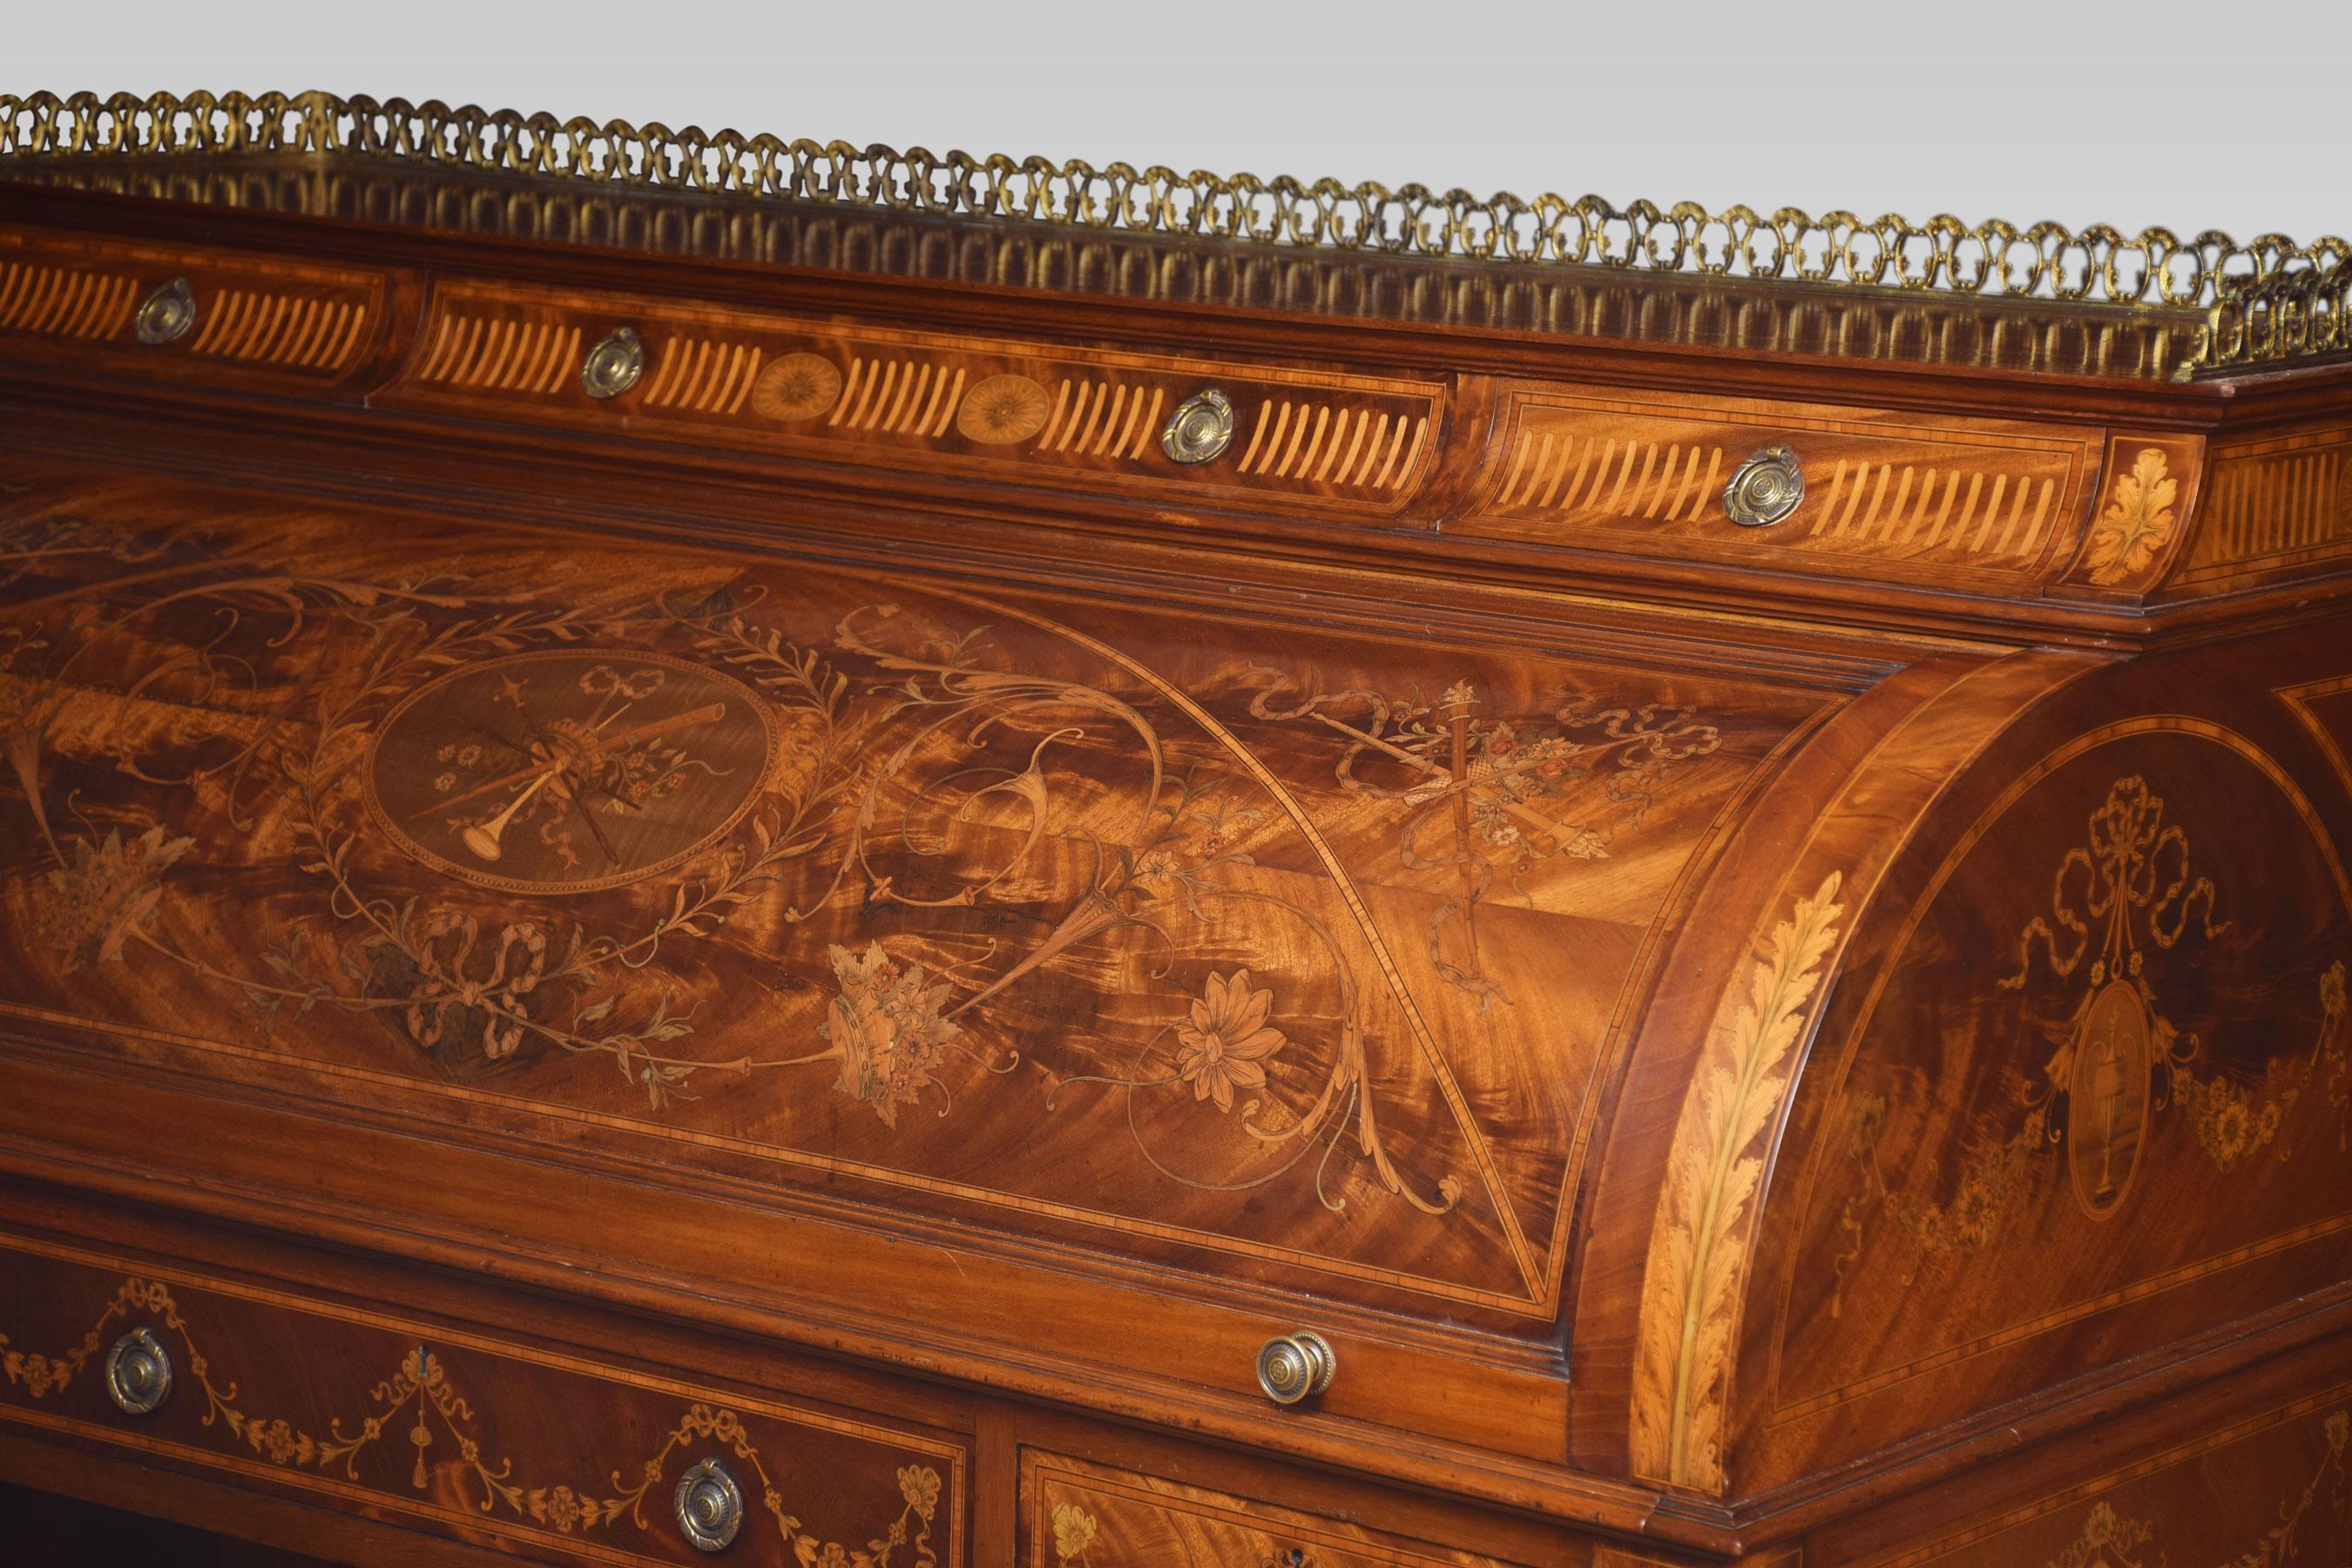 Substantial Sheraton Revival Marquetry Inlaid Cylinder Bureau 13